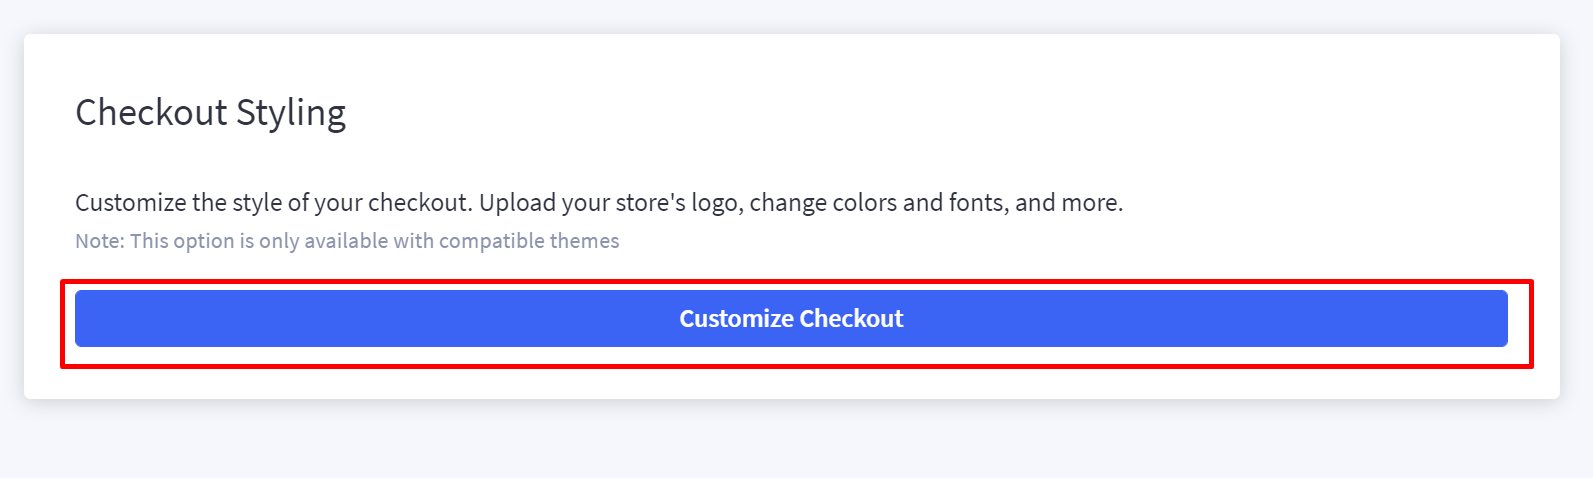 Step 3: Scroll down to the “Checkout Styling” section and select “Customize Checkout”